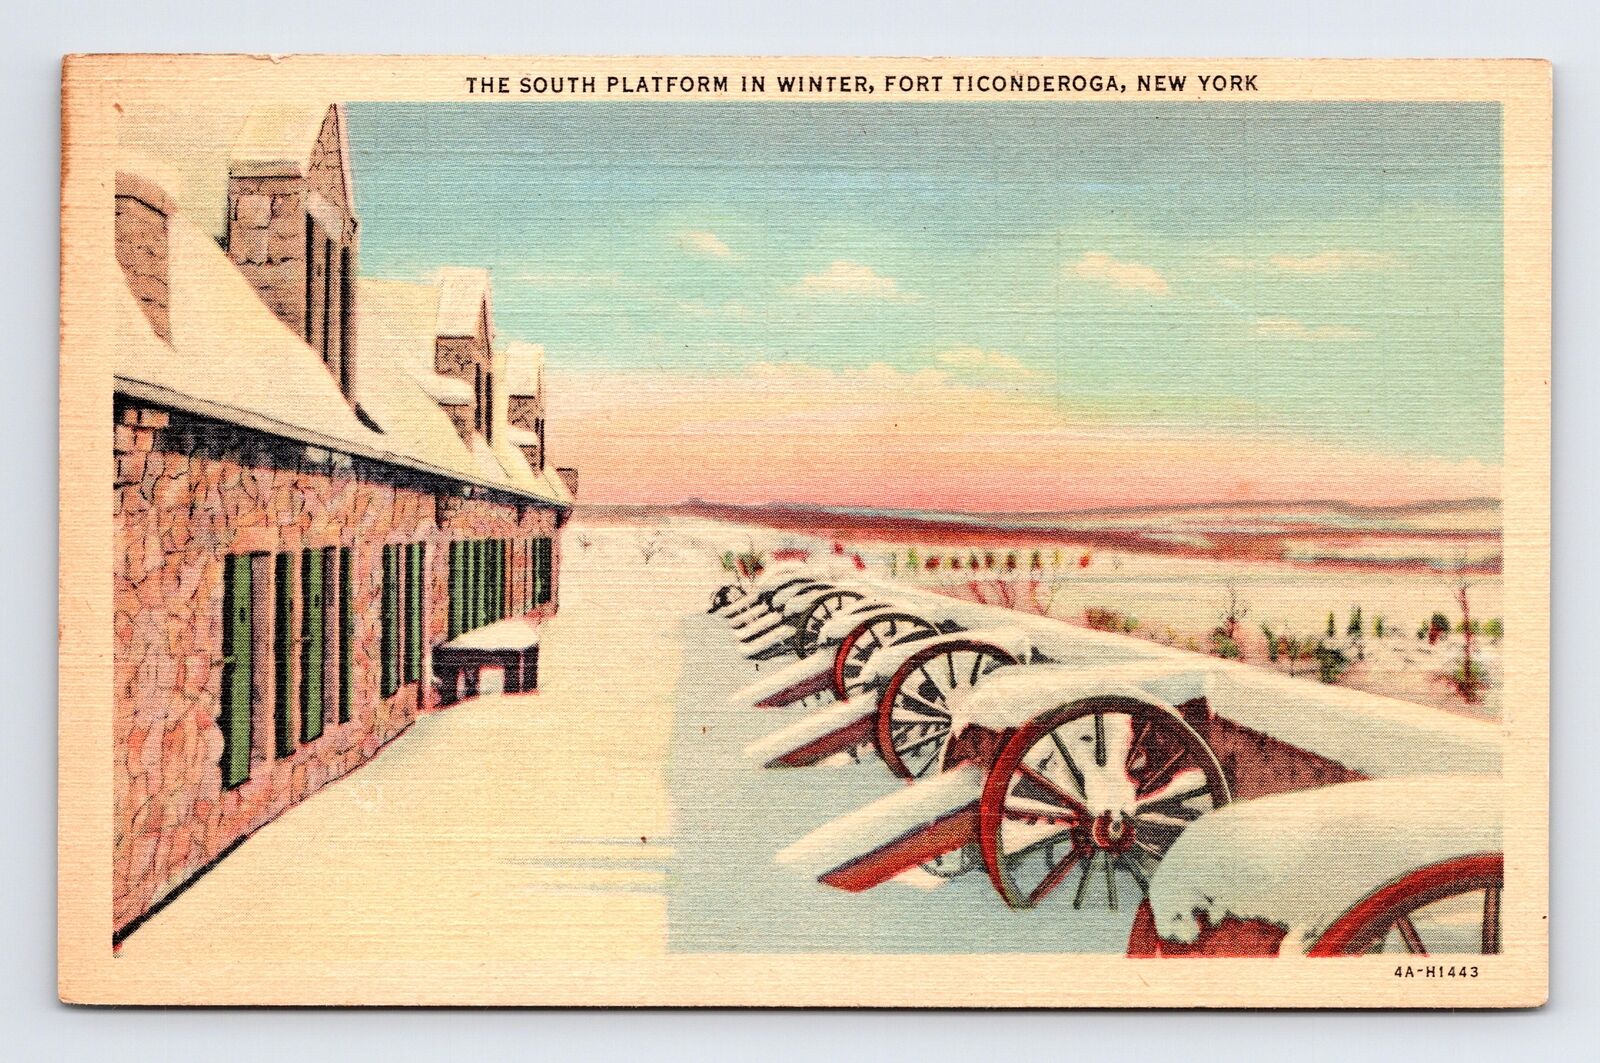 c1934 Postcard Fort Ticonderoga NY New York South Platform in Winter Cannons